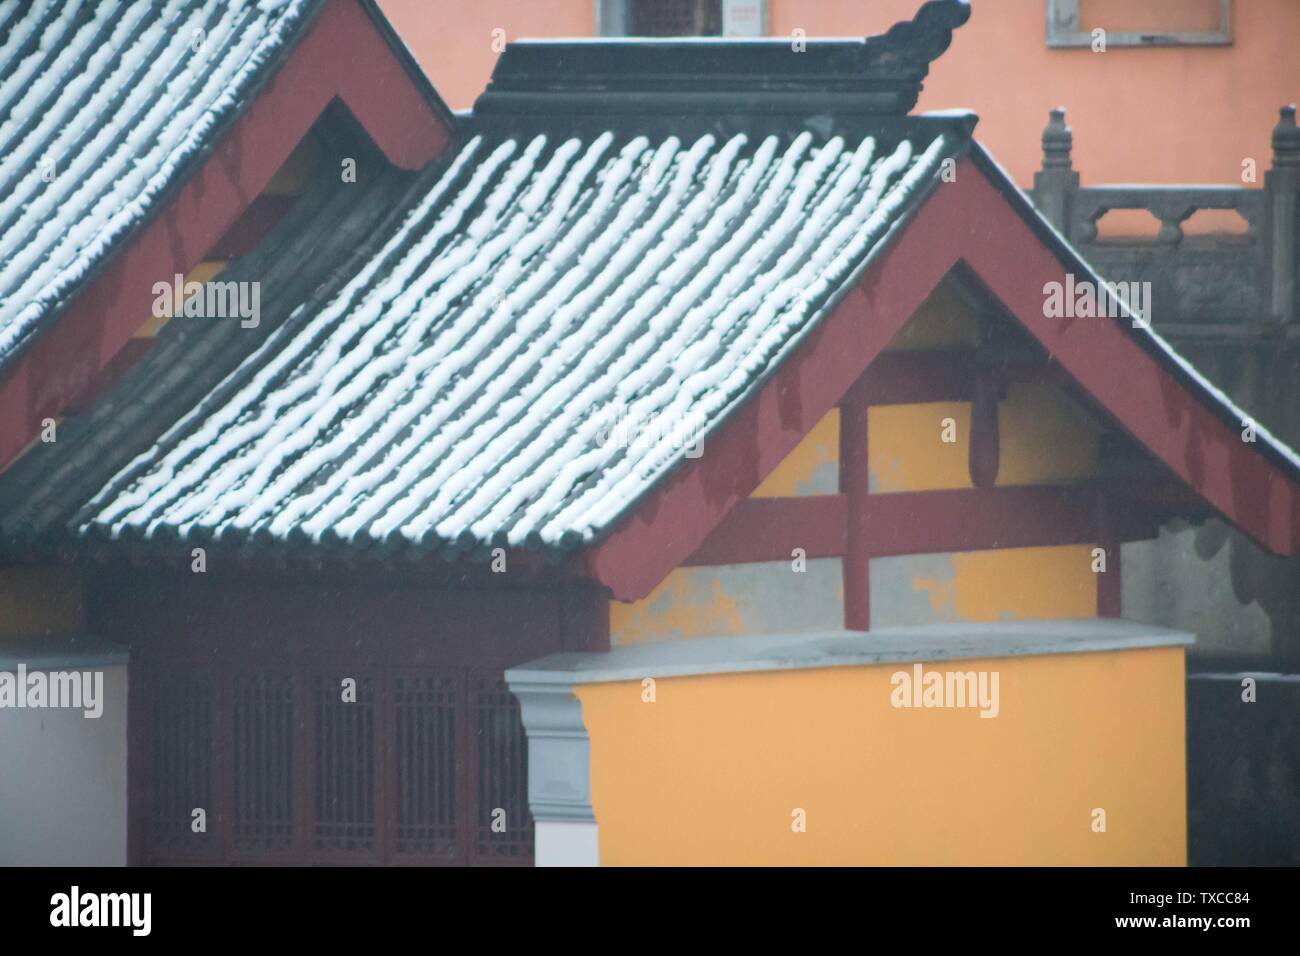 2019 Jiming Temple in Nanjing first snow Stock Photo